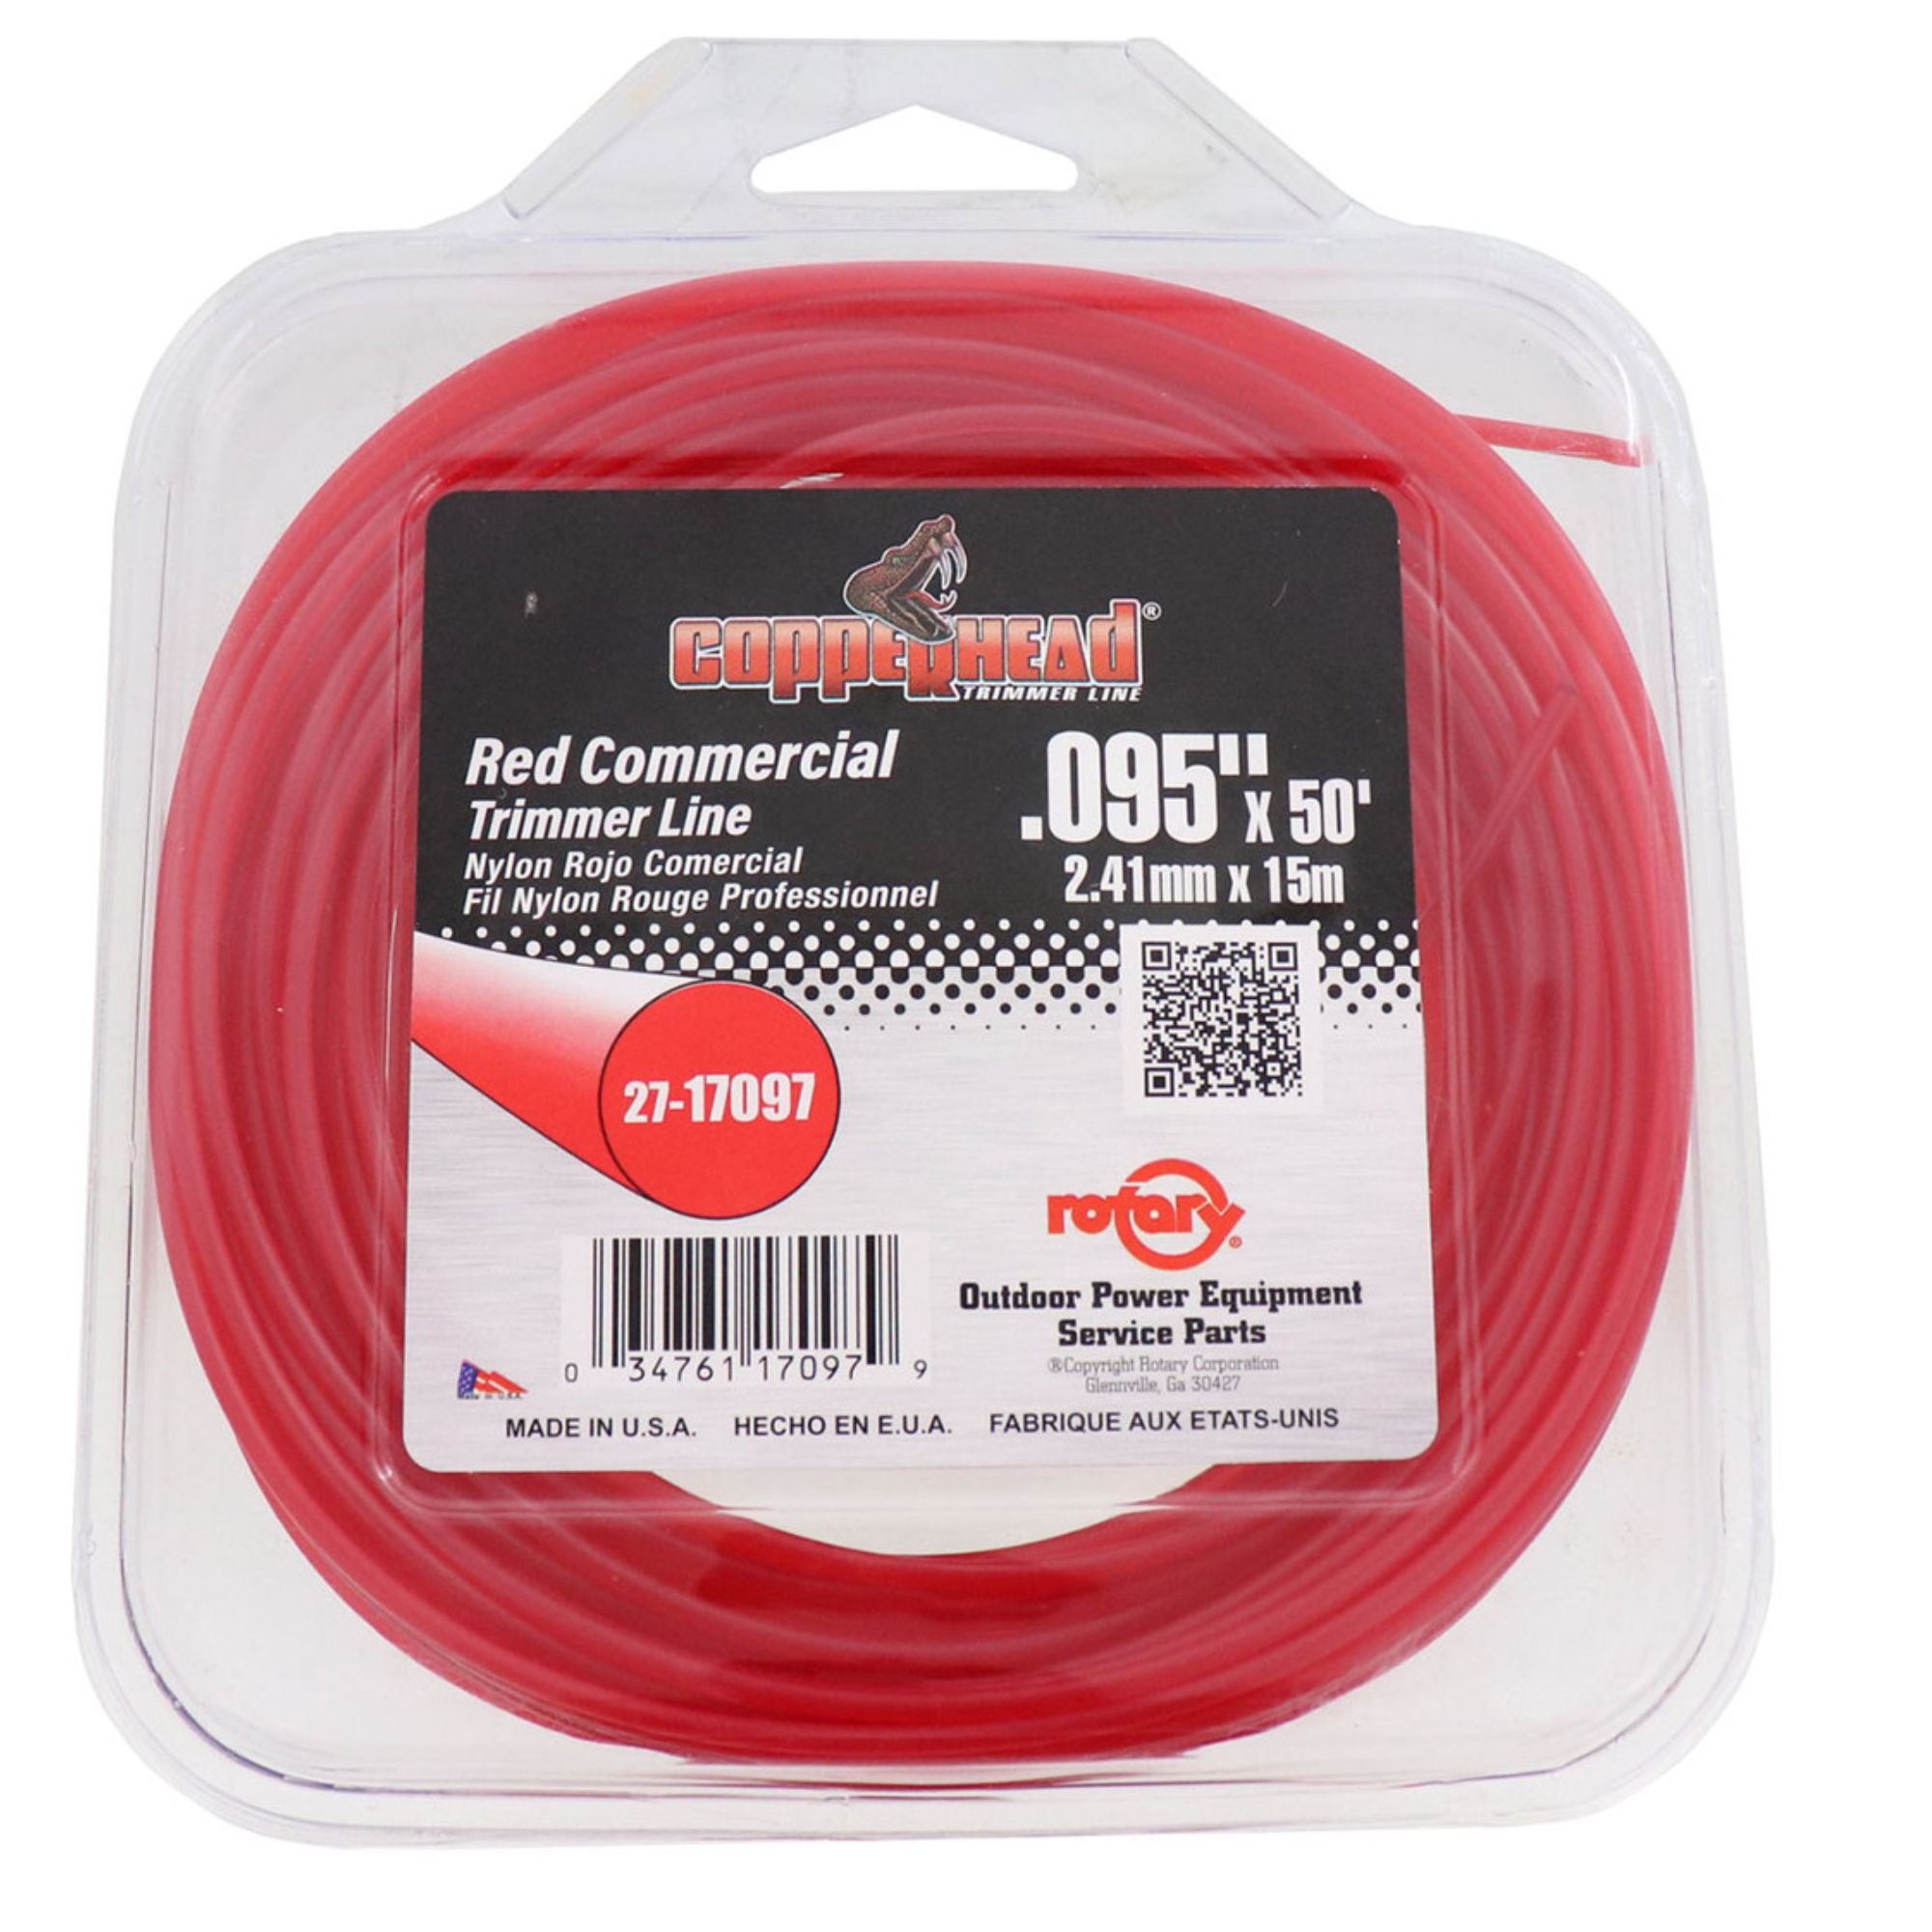 Rotary .095" X 50 Red Commercial Trimmer Line | 17097